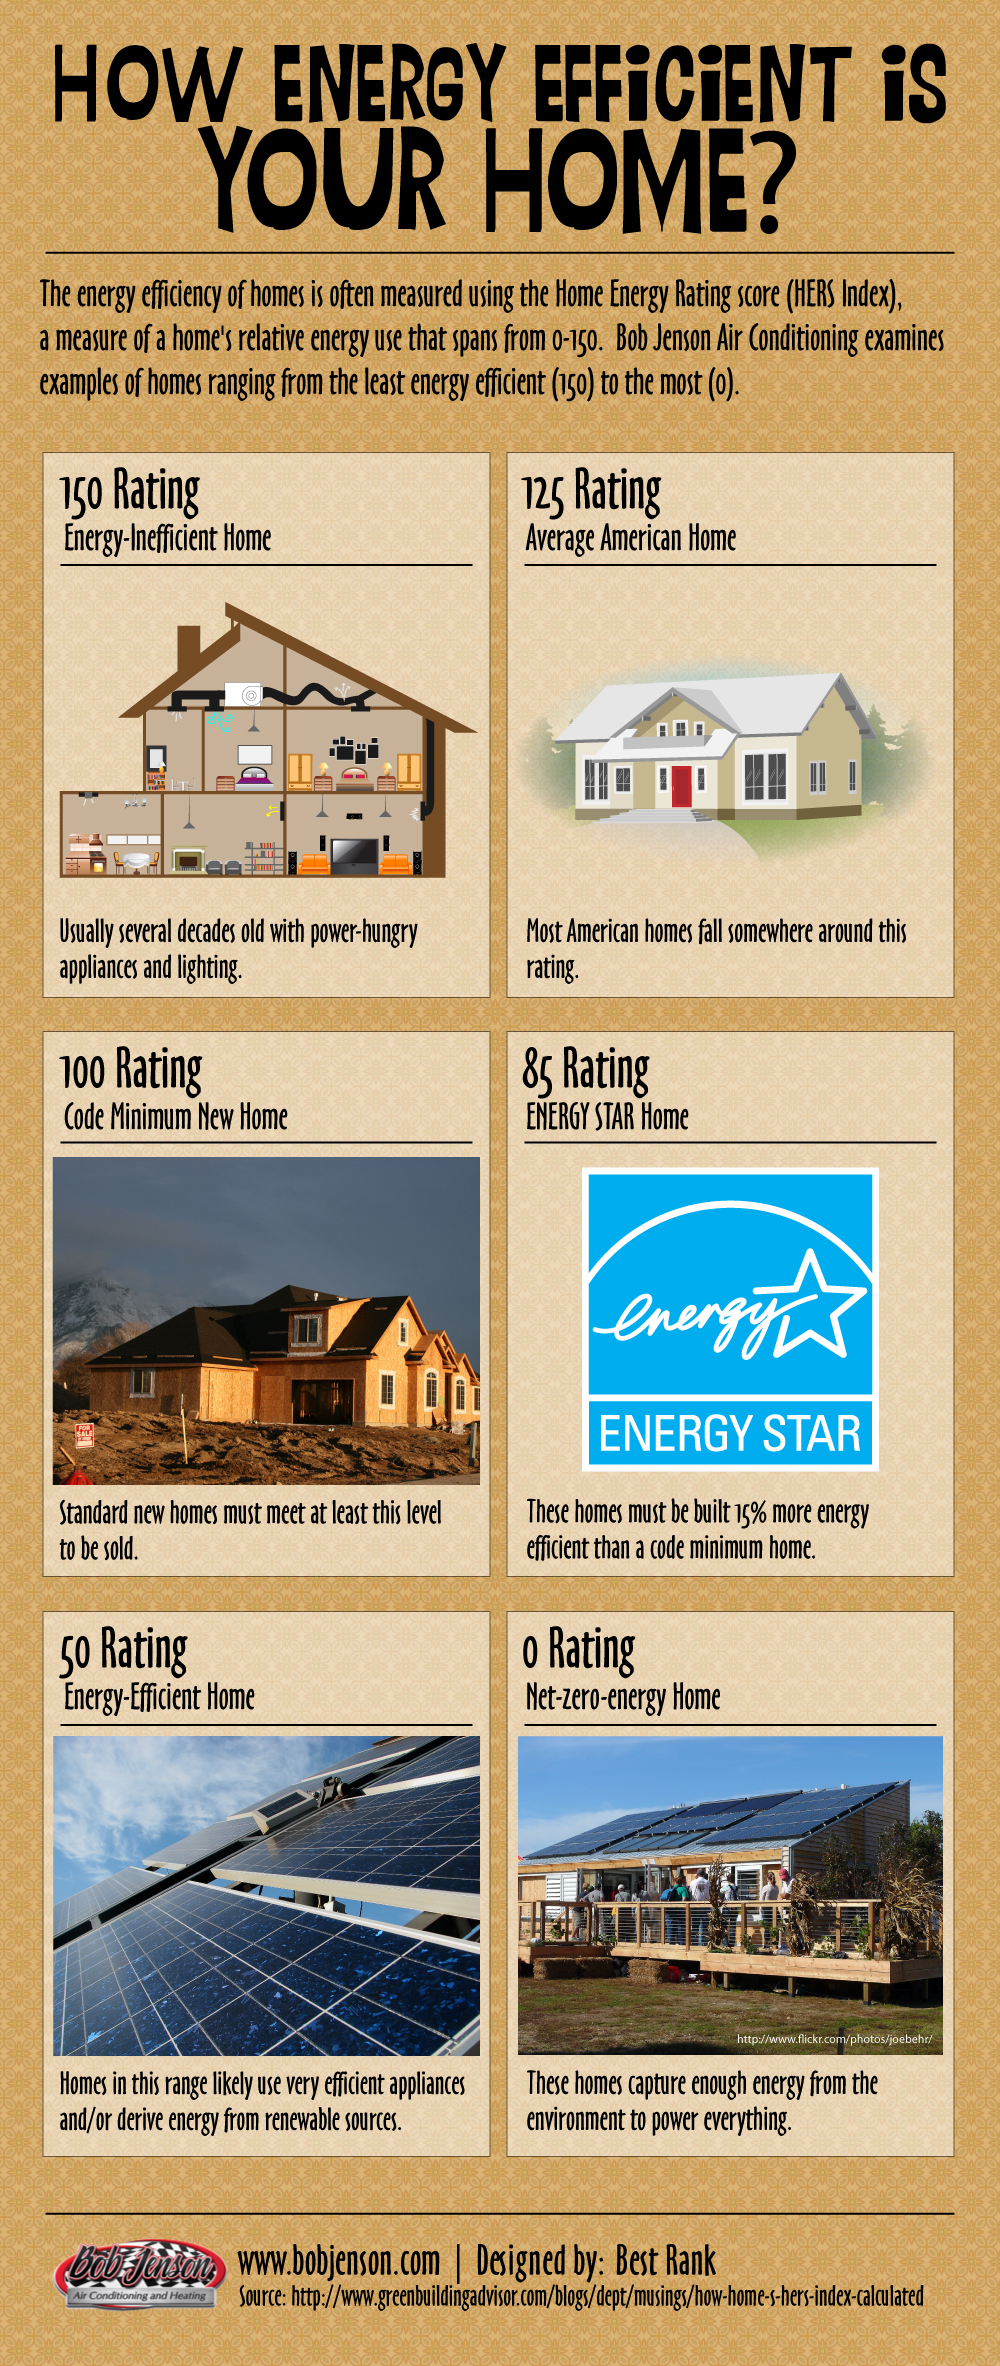 How Energy Efficient Is Your Home?